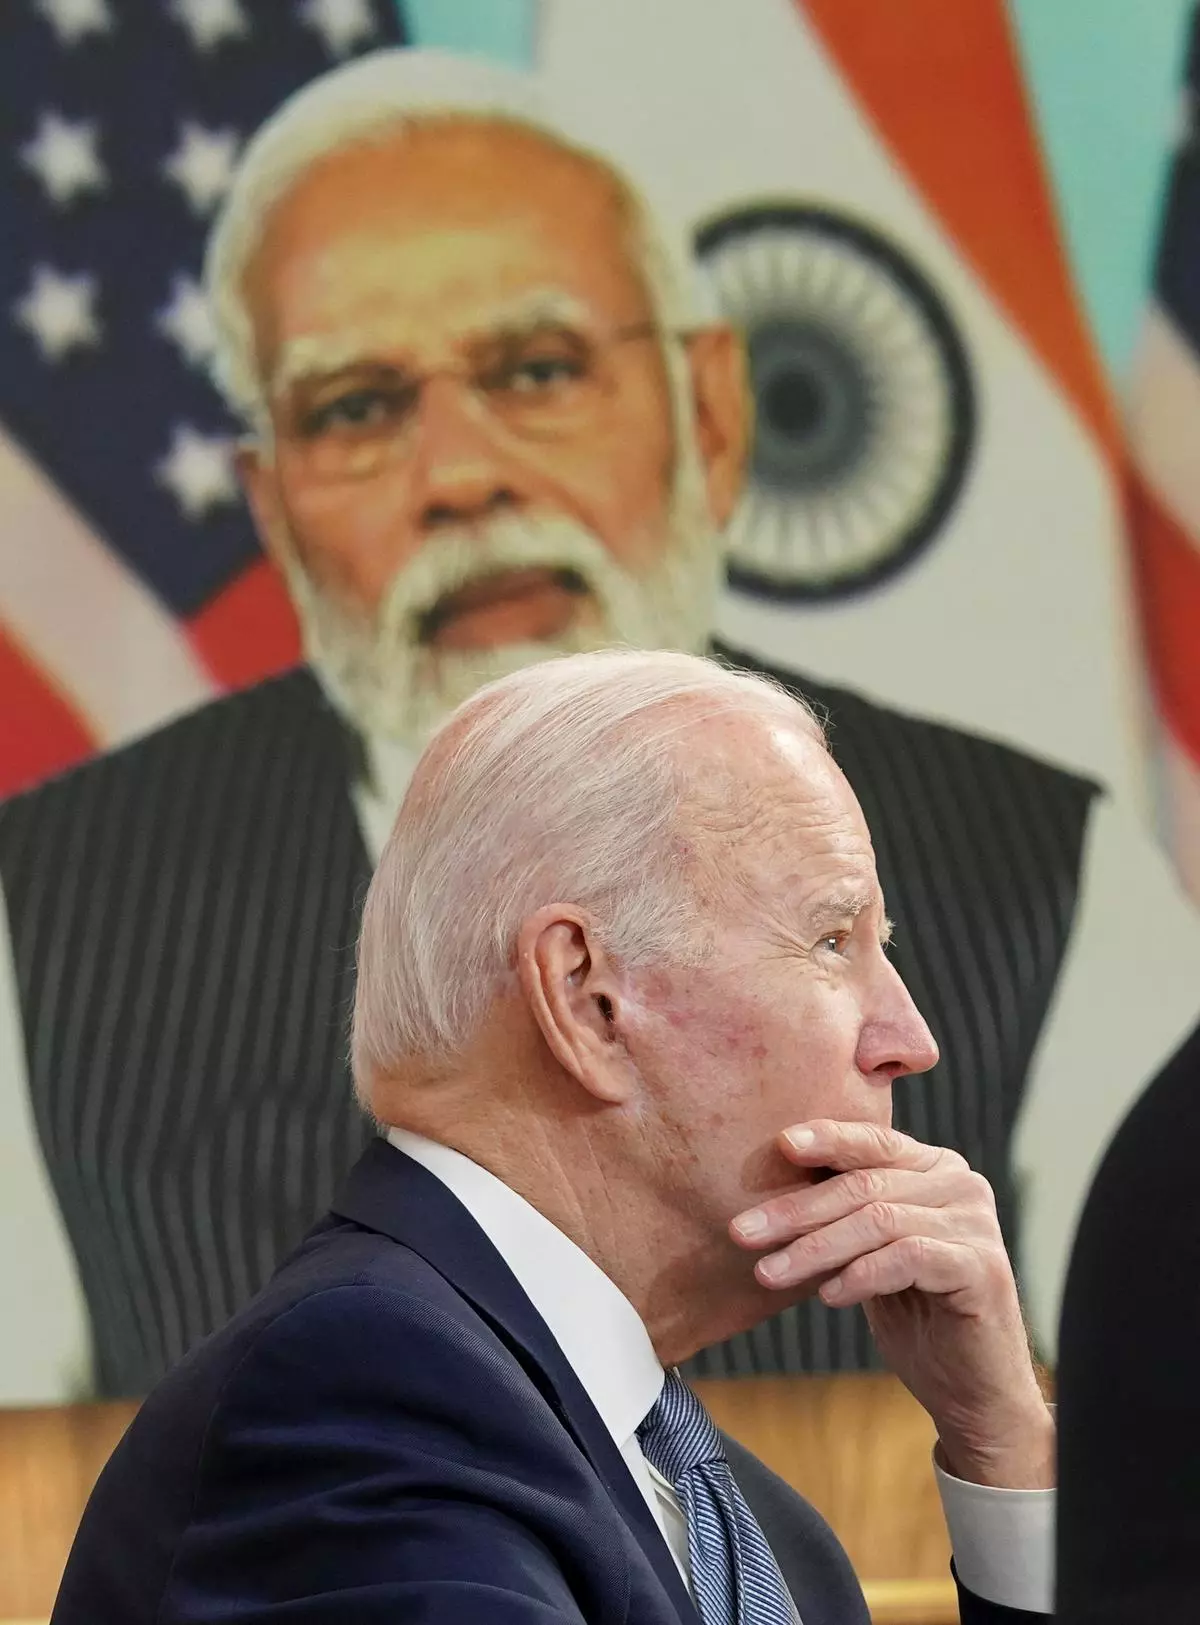 US President Joe Biden holds virtual talks via videoconference with Prime Minister Narendra Modi from the Eisenhower Executive Office Building’s South Court Auditorium at the White House in Washington, on Monday 